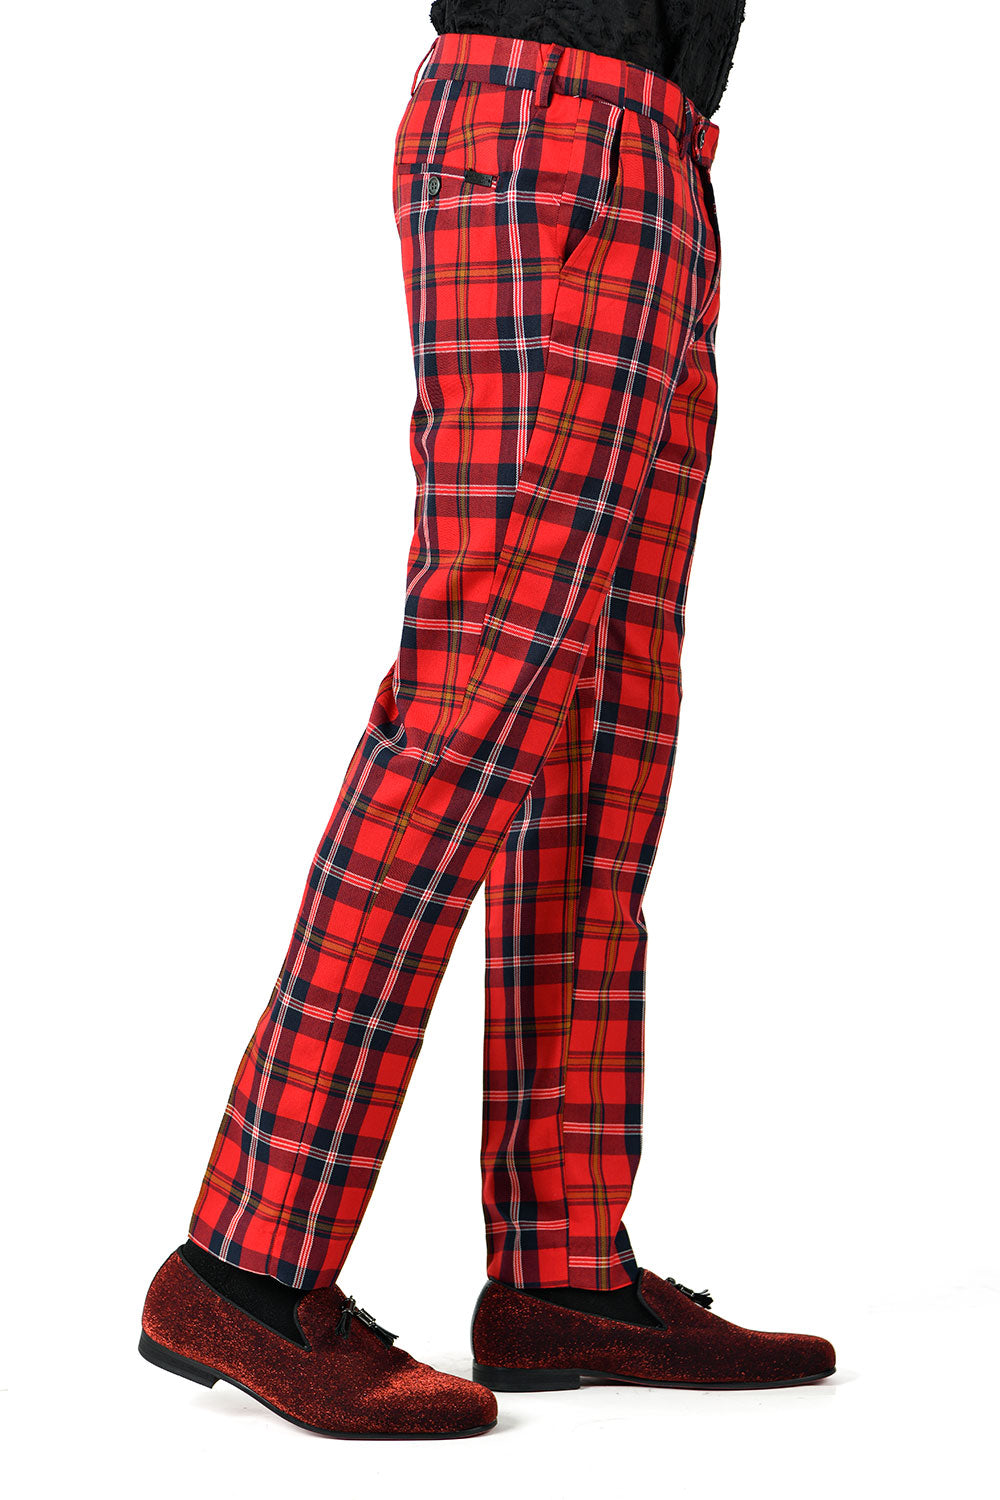 BARABAS men's checkered plaid Red and White chino pants CP48